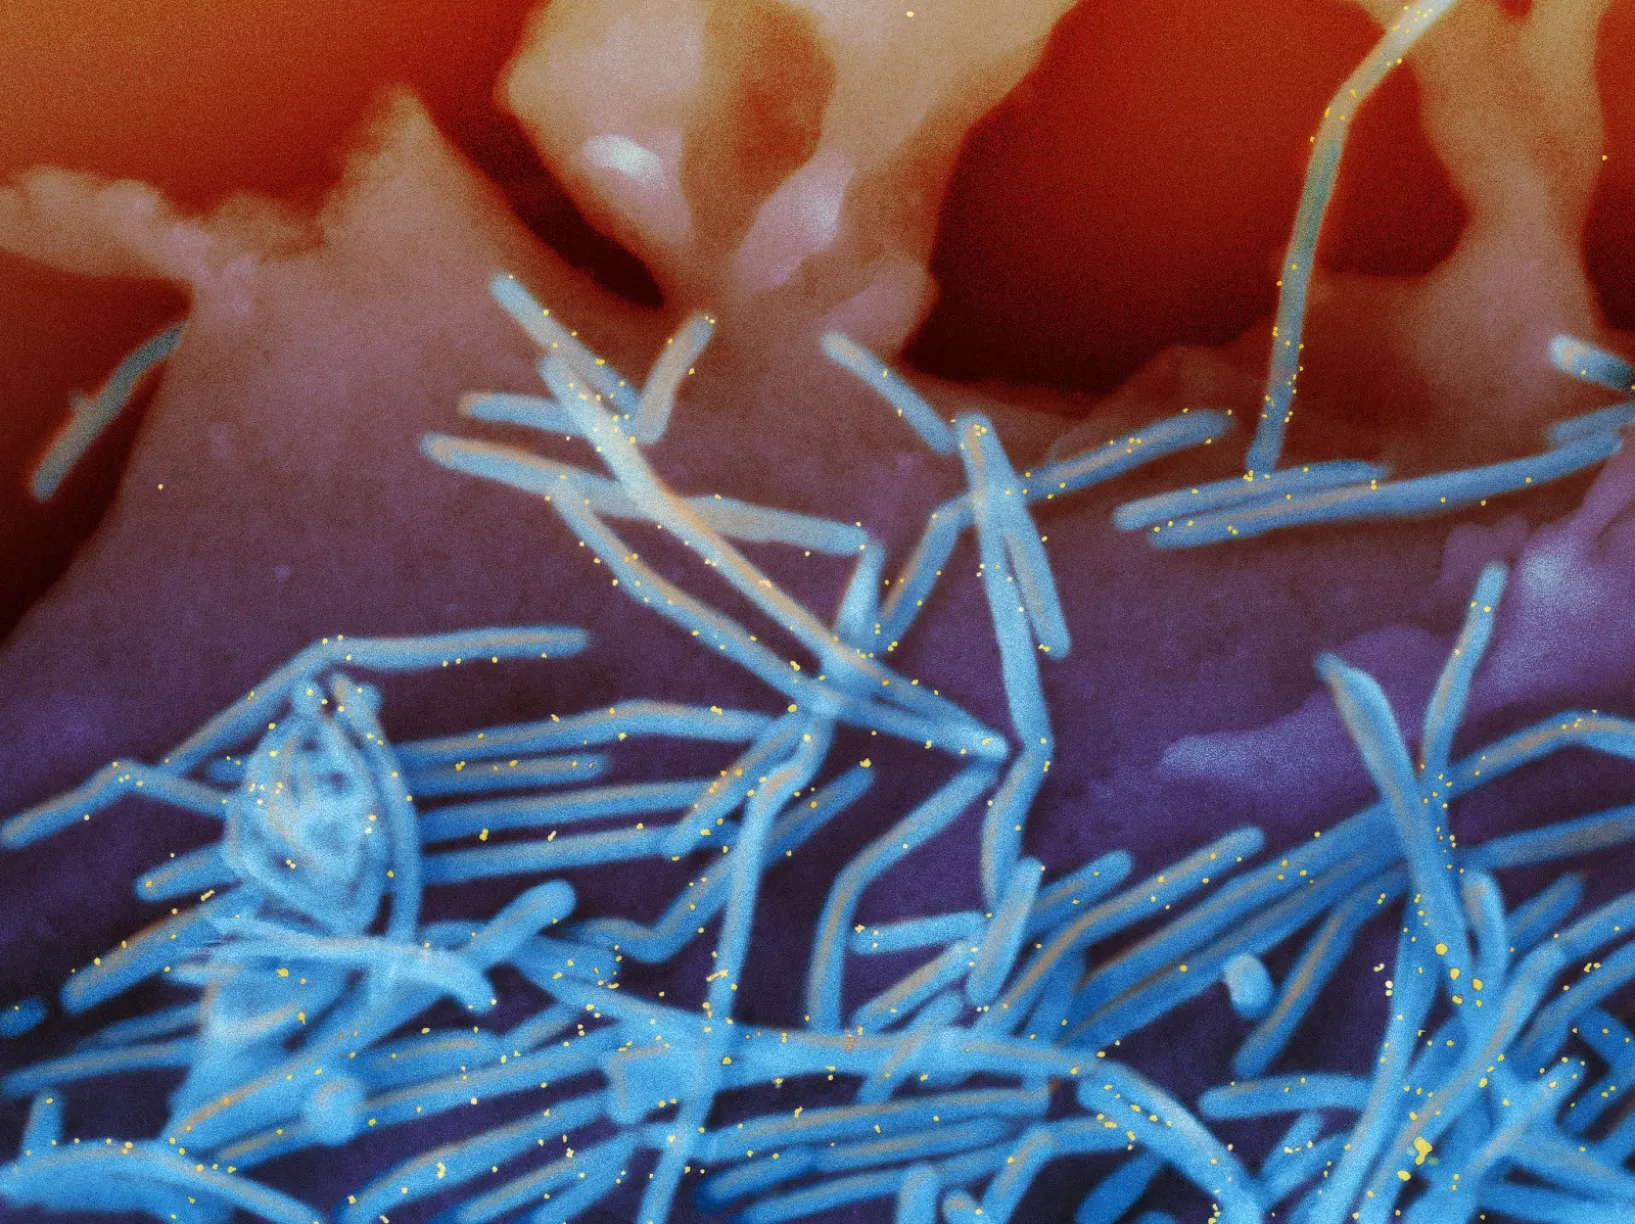 A graphic of microbiological life